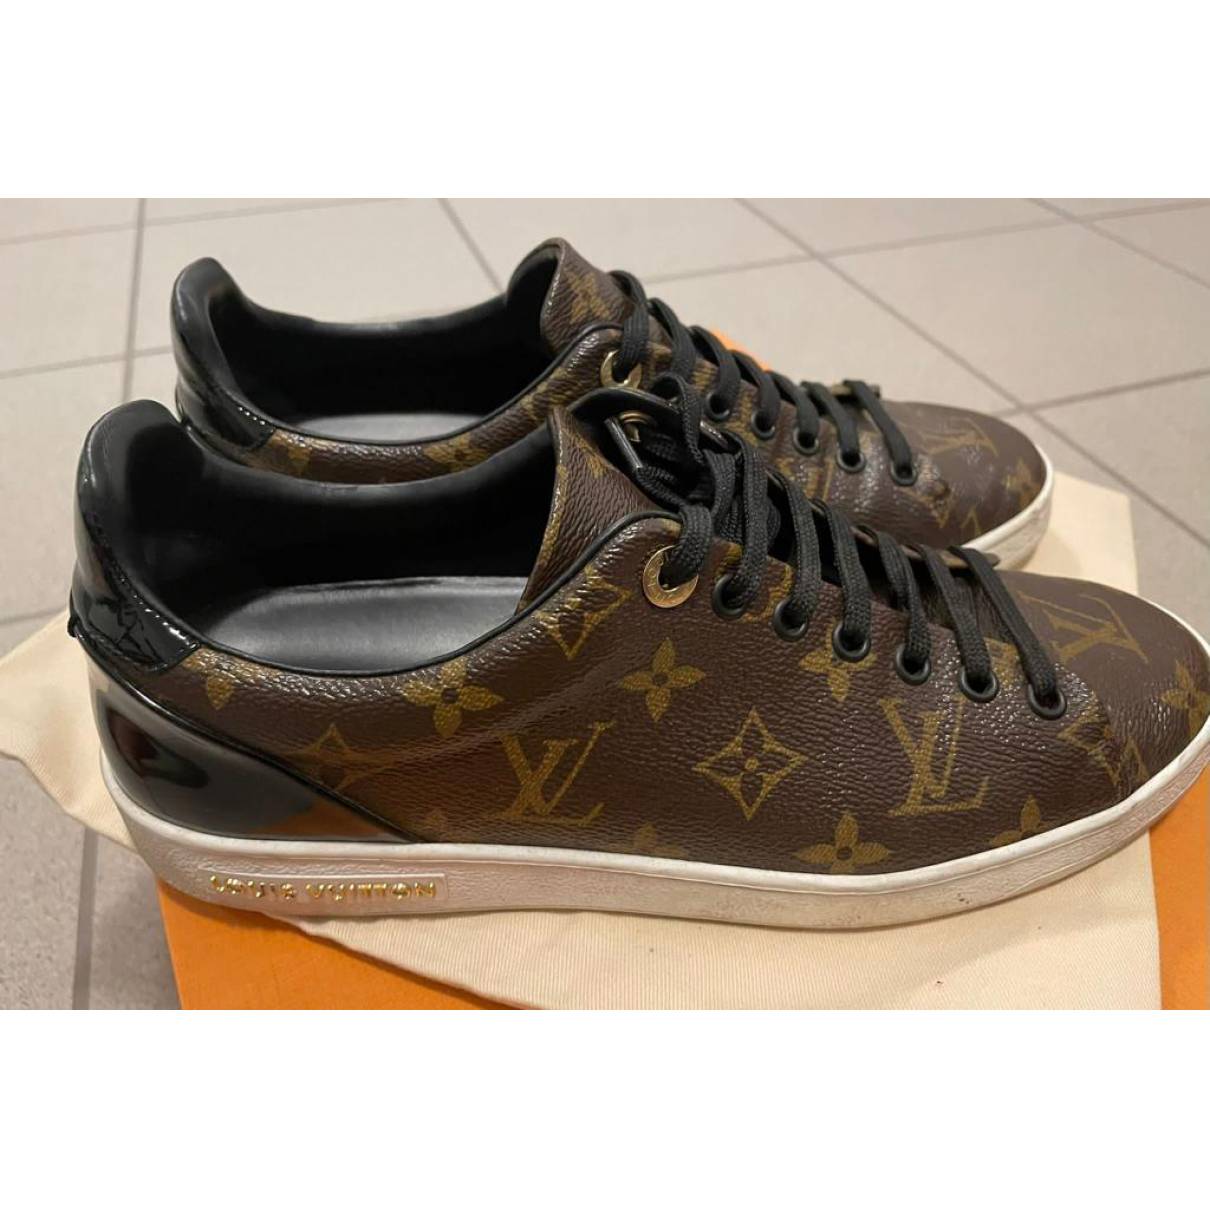 Louis Vuitton - Authenticated FRONTROW Trainer - Leather Brown Plain for Women, Very Good Condition